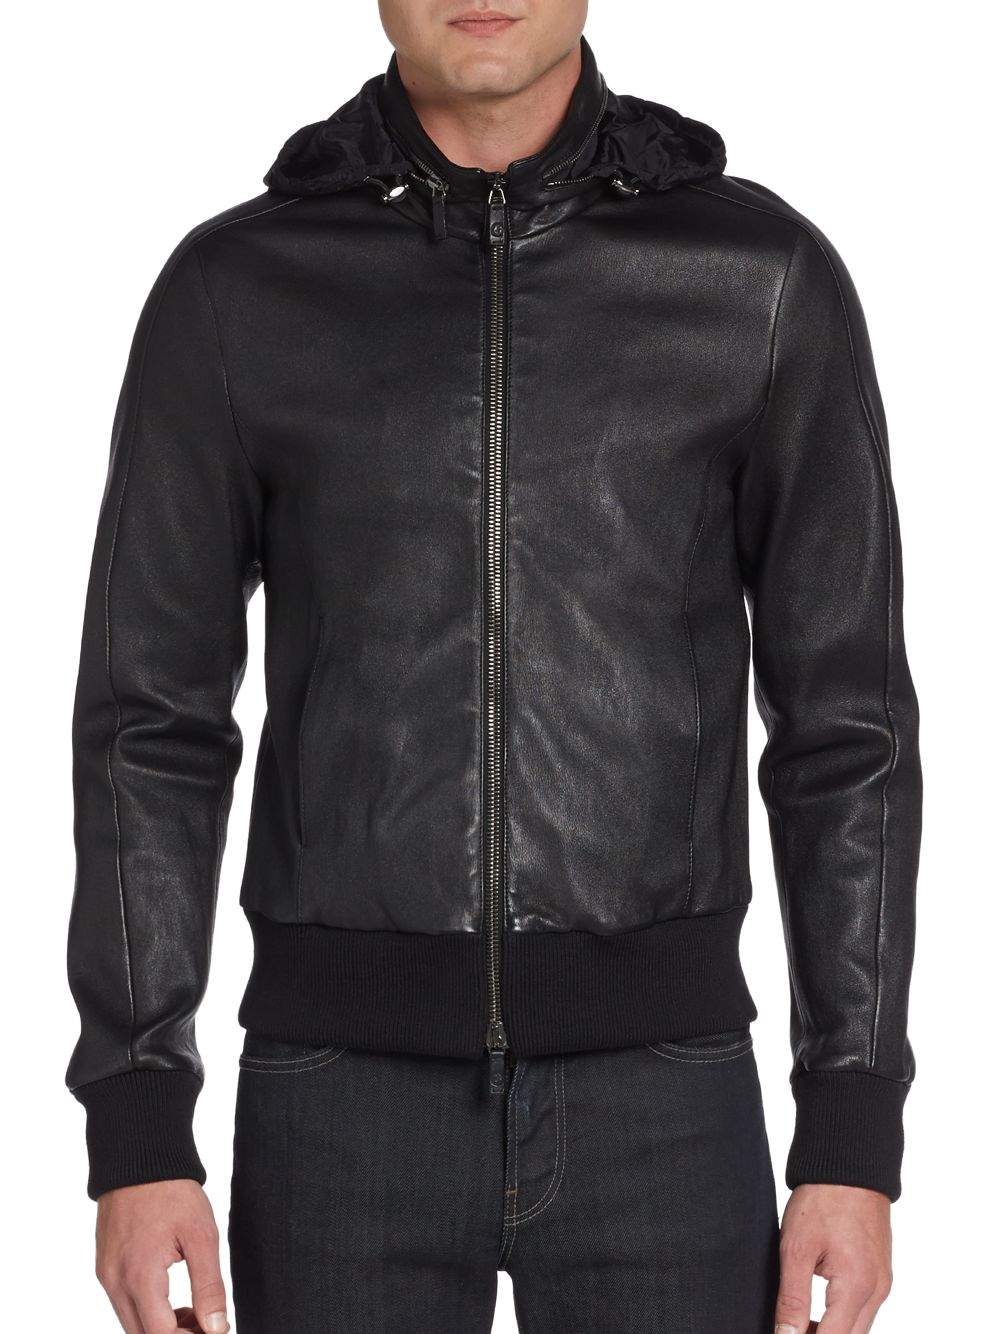 Giorgio Armani Hooded Leather Bomber Jacket in Black for Men - Lyst